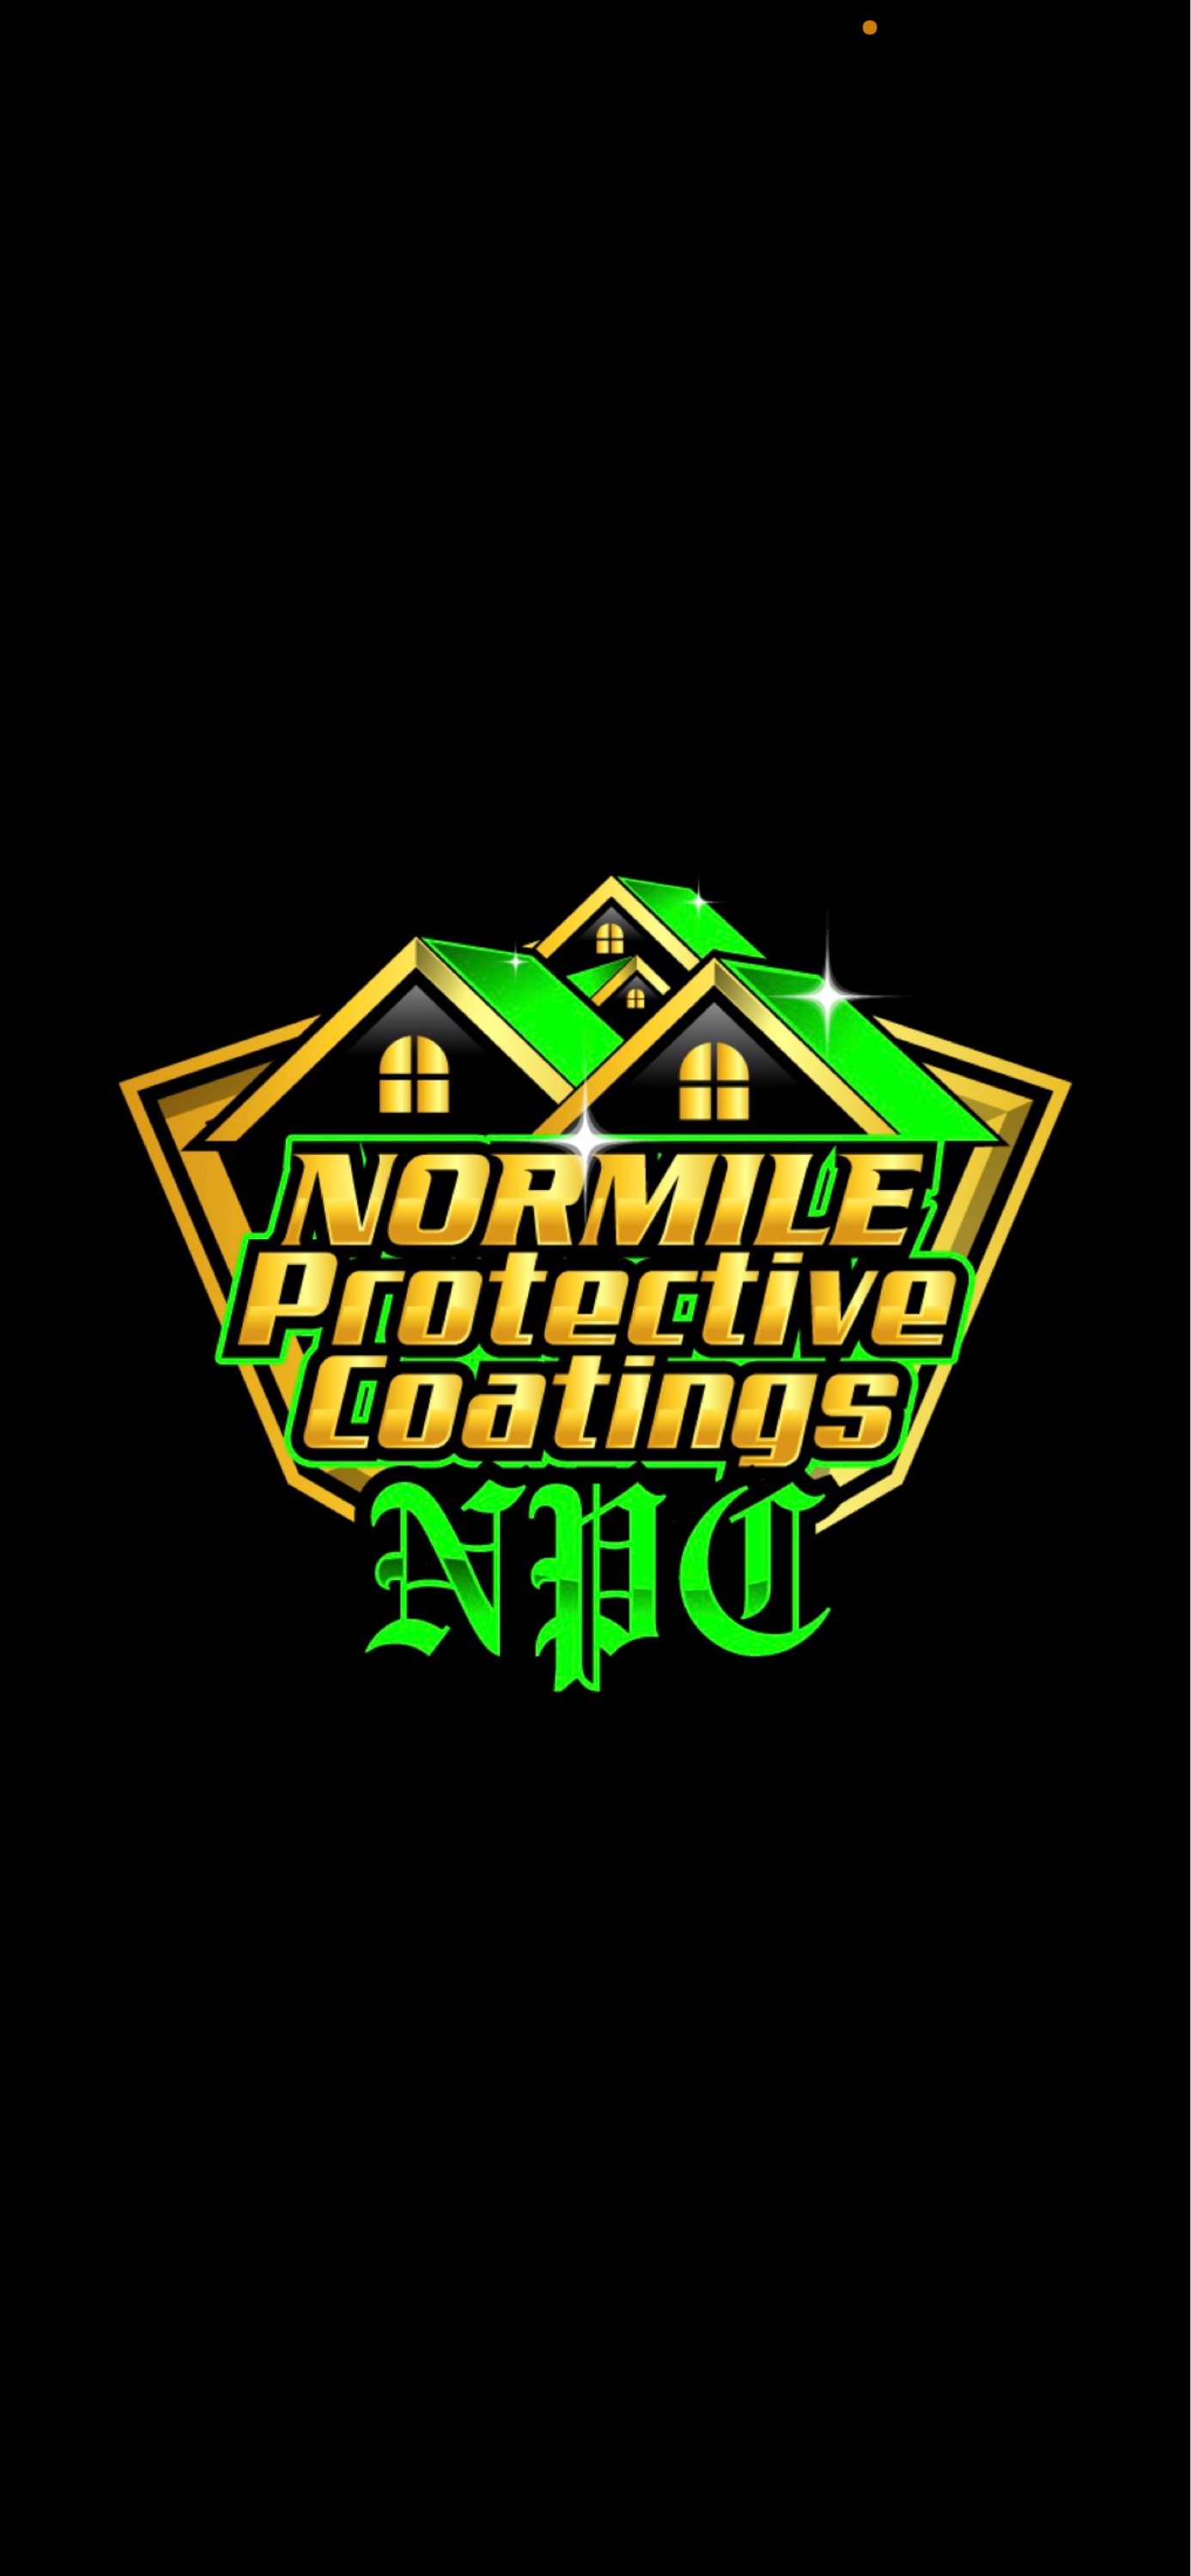 Normile Protective Coatings Logo